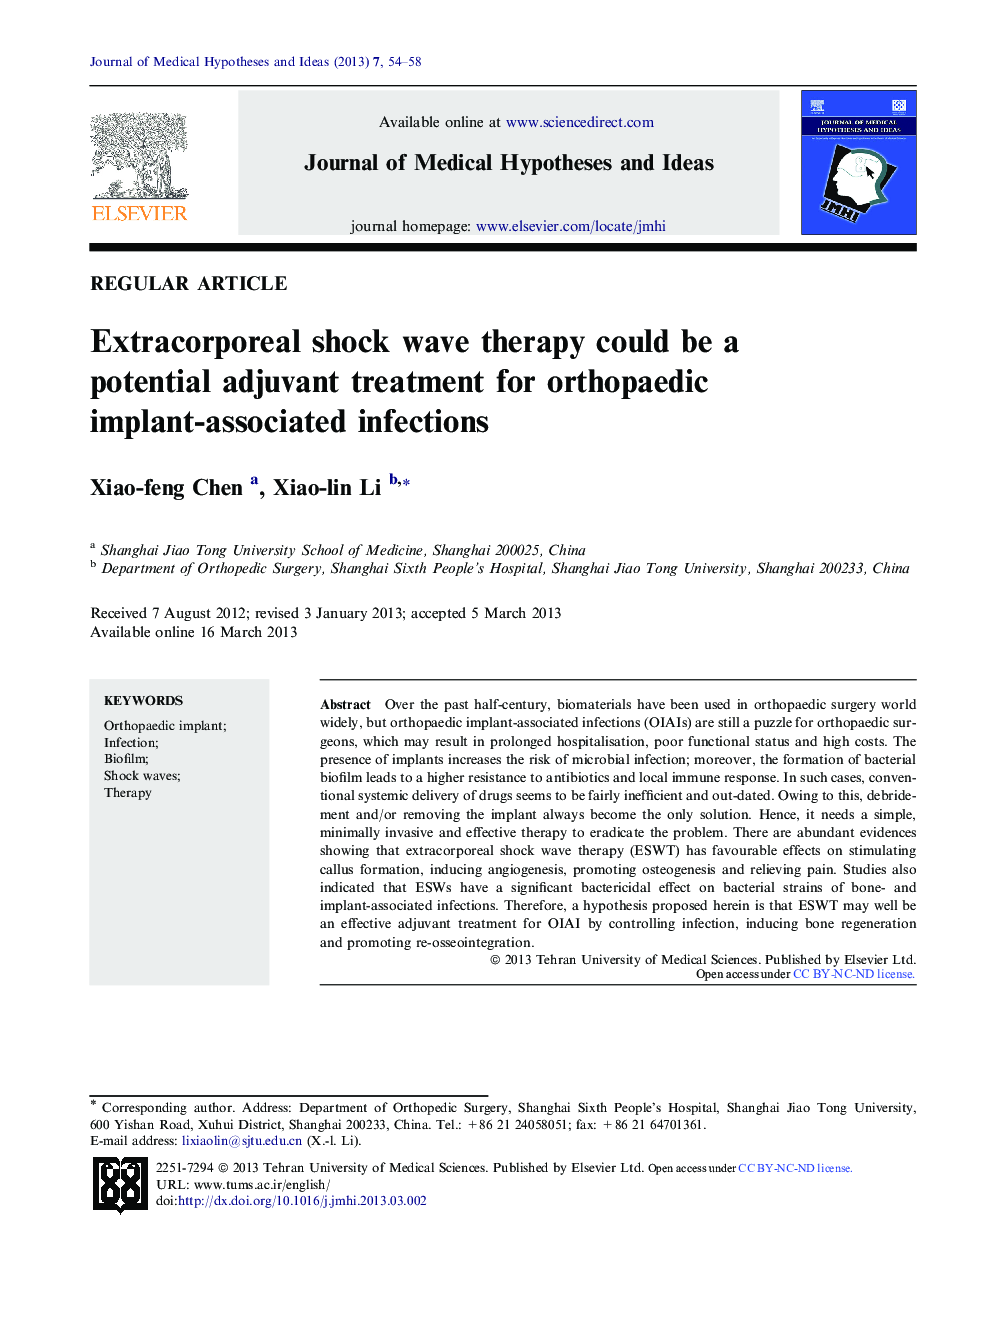 Extracorporeal shock wave therapy could be a potential adjuvant treatment for orthopaedic implant-associated infections 